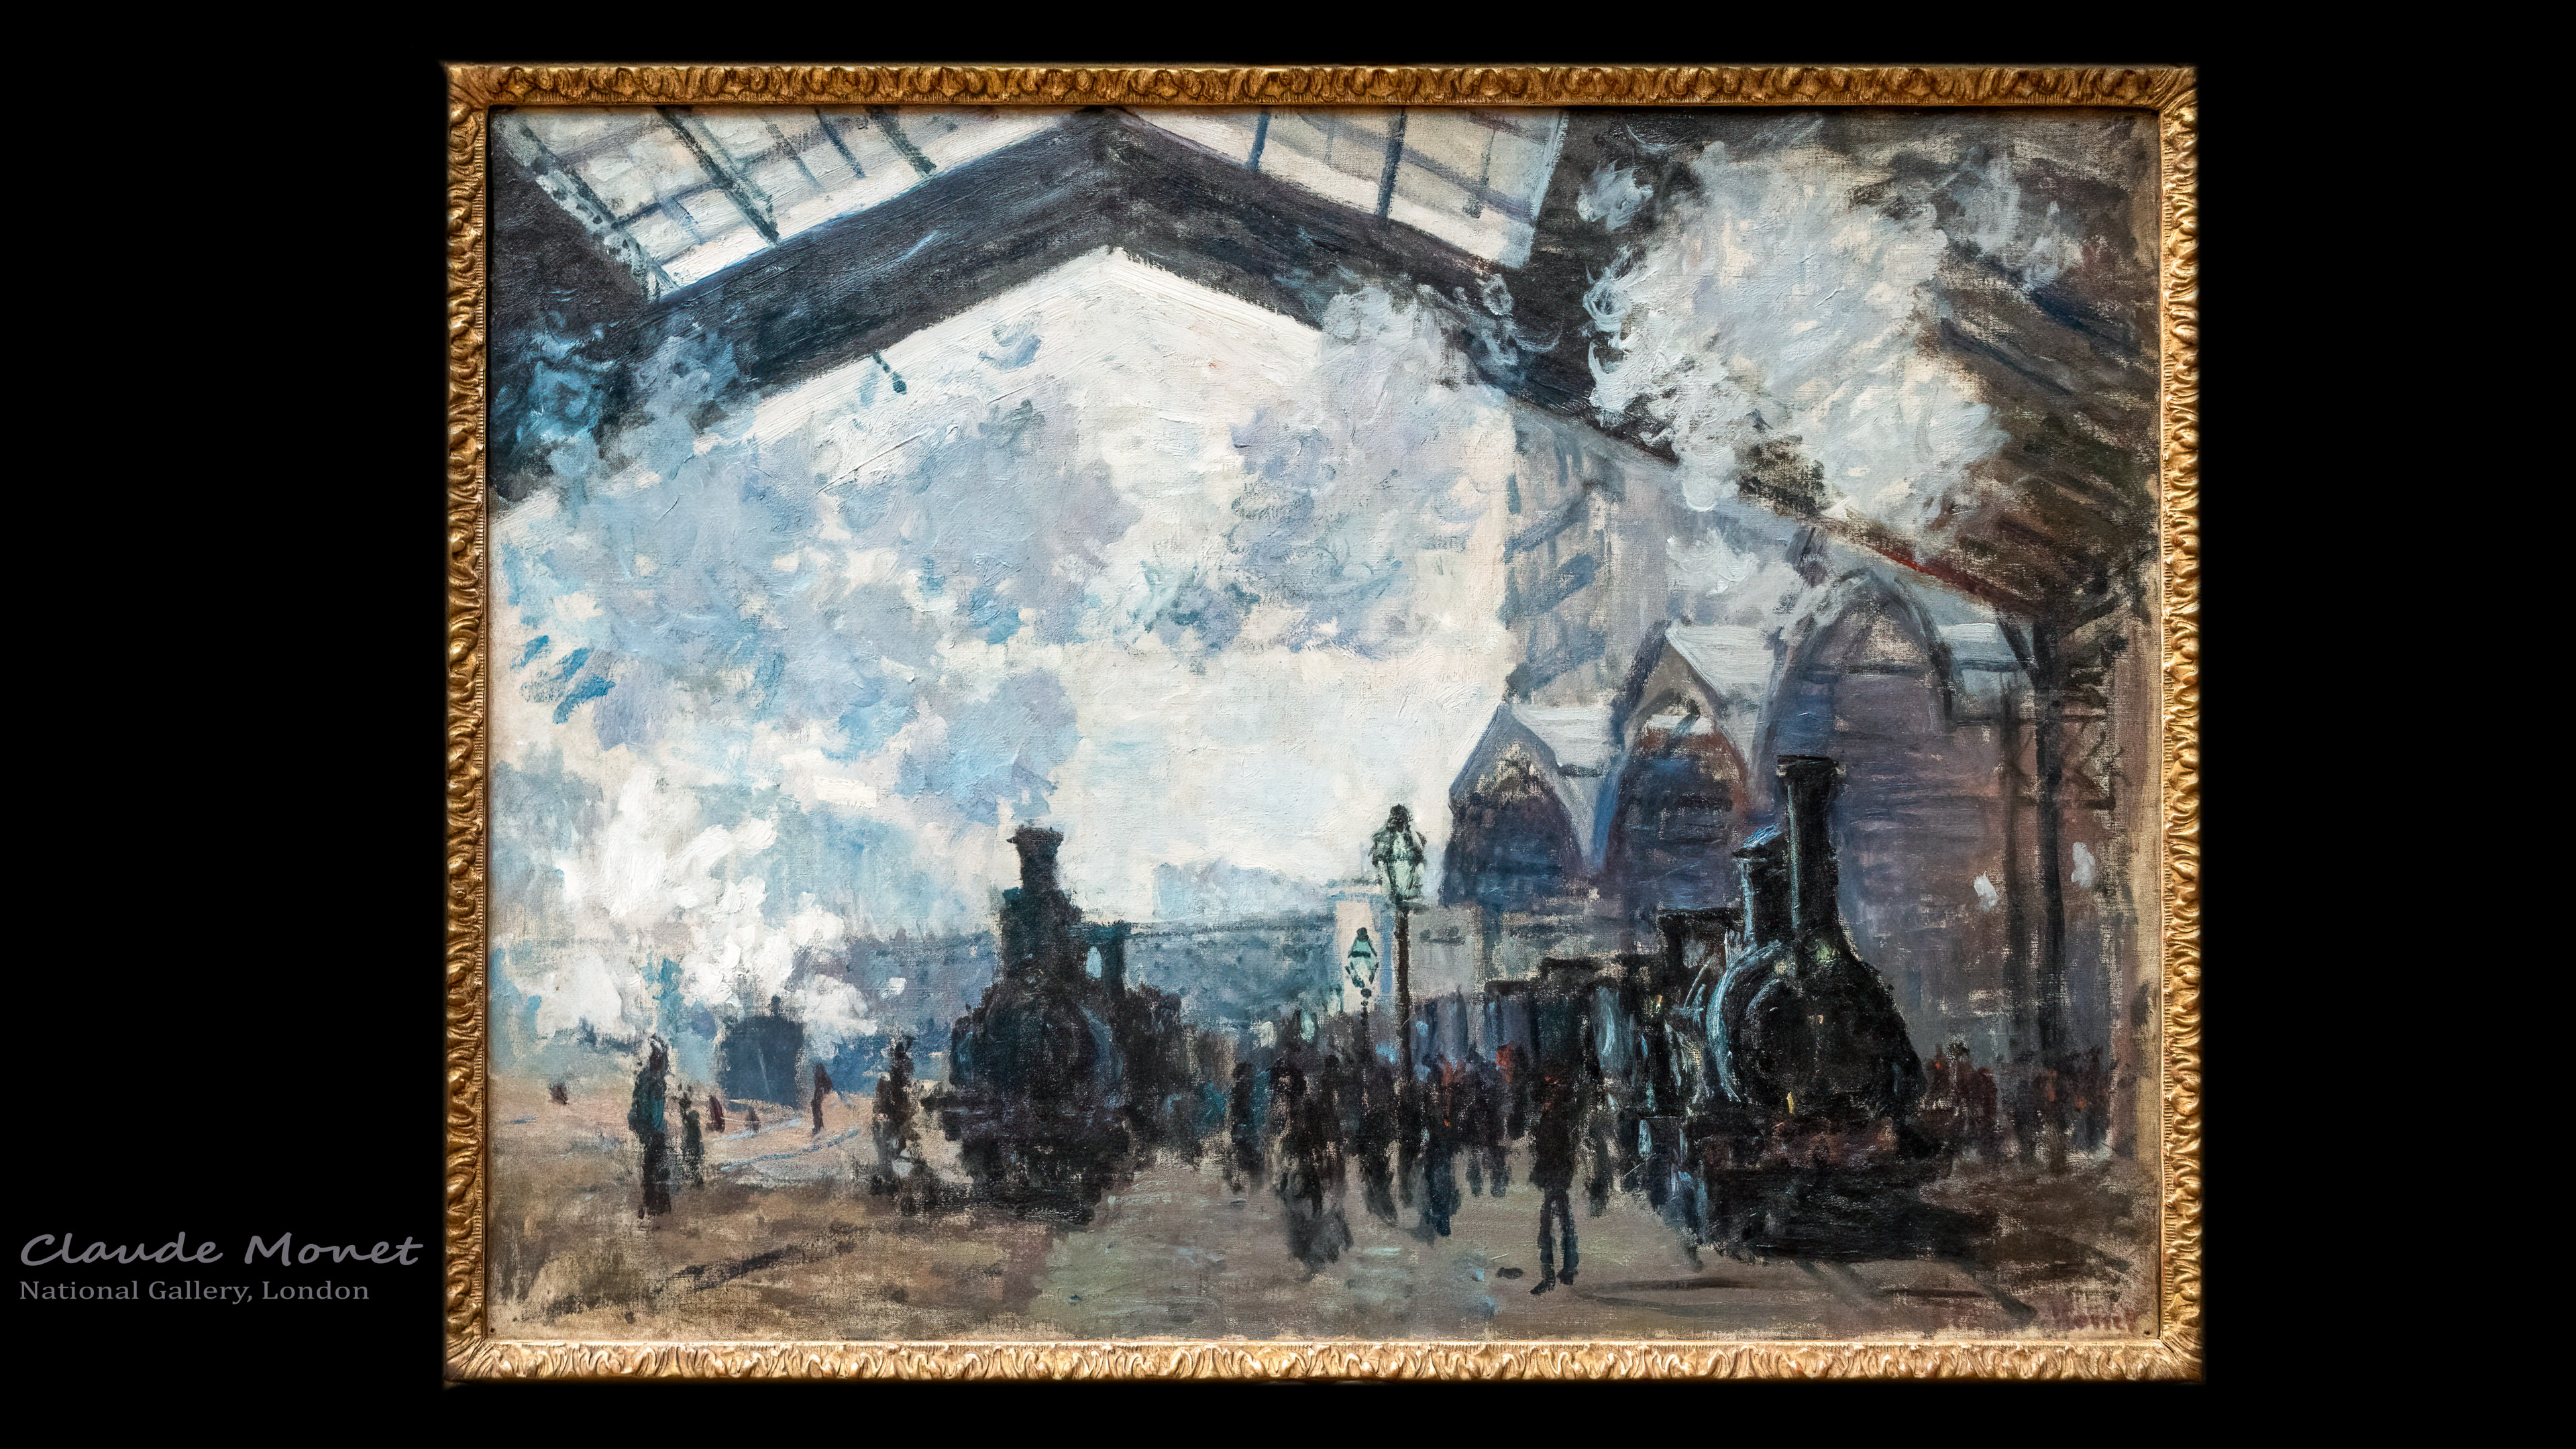 Discover the grandeur and dynamism of ‘La Gare Saint-Lazare’ Claude Monet PC painting wallpaper, featuring the impressive and atmospheric view of the train station and its surroundings in Paris.